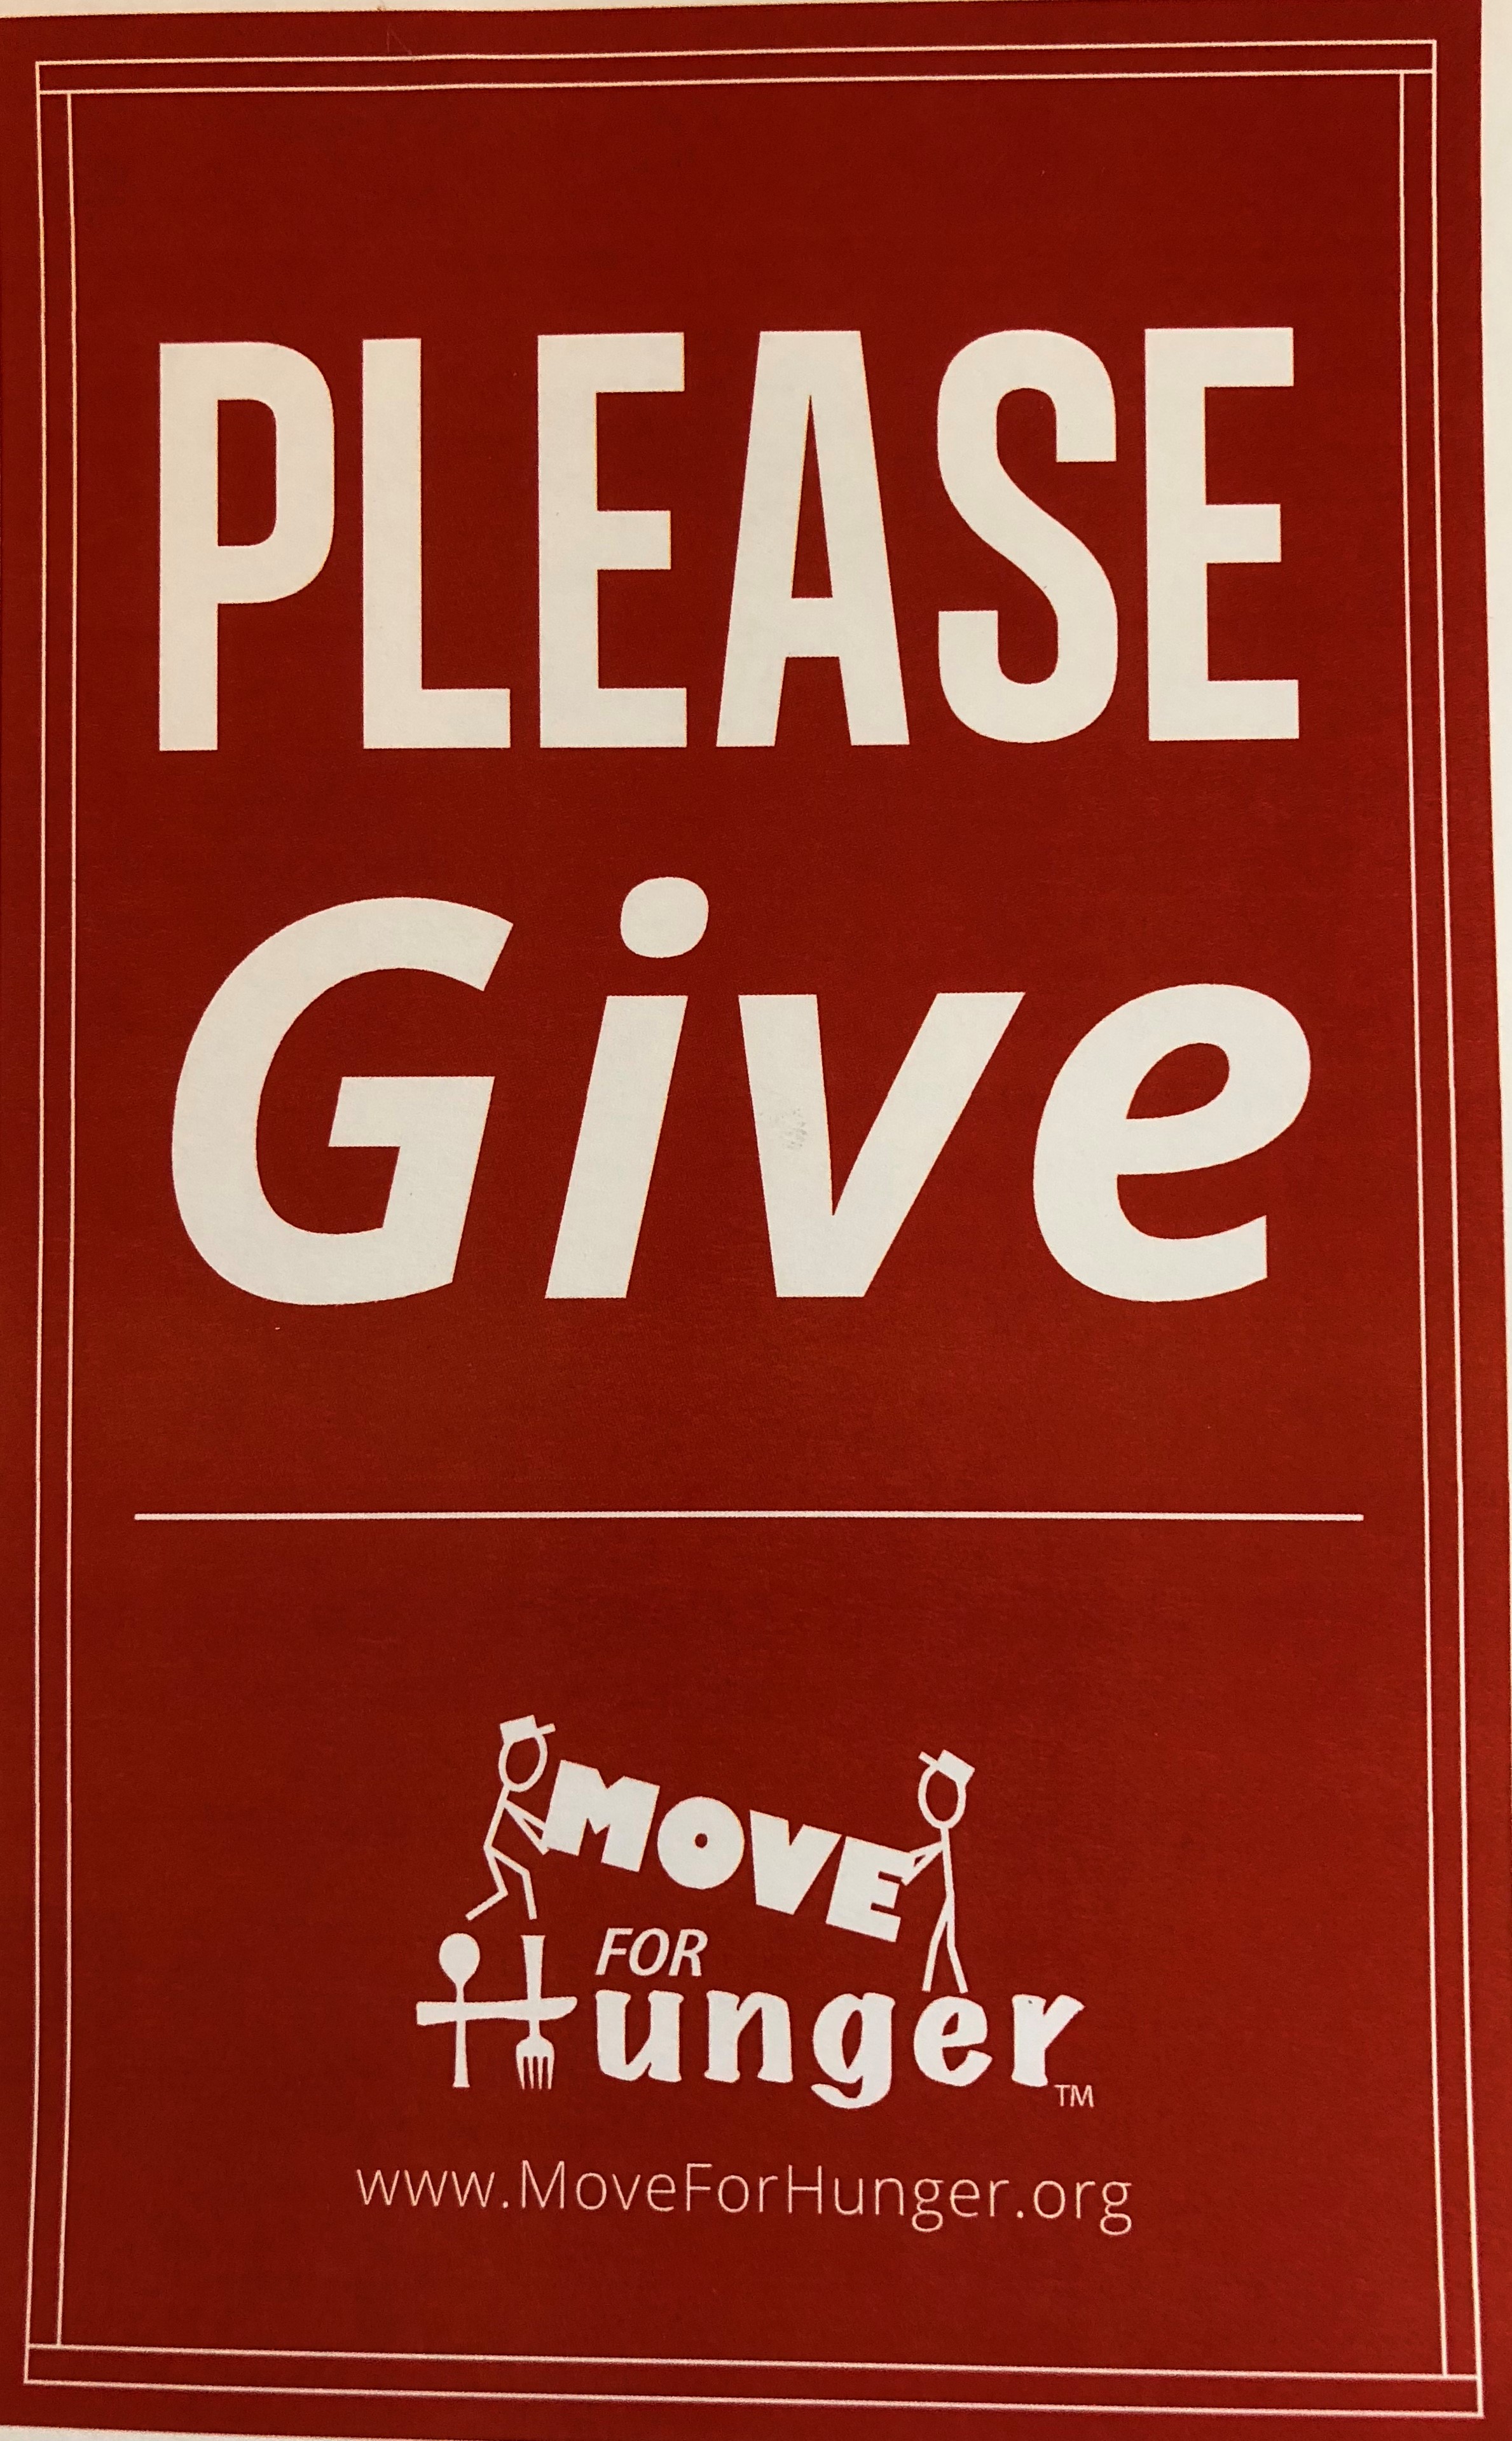 Please-Give-Move-for-Hunger-Postcard